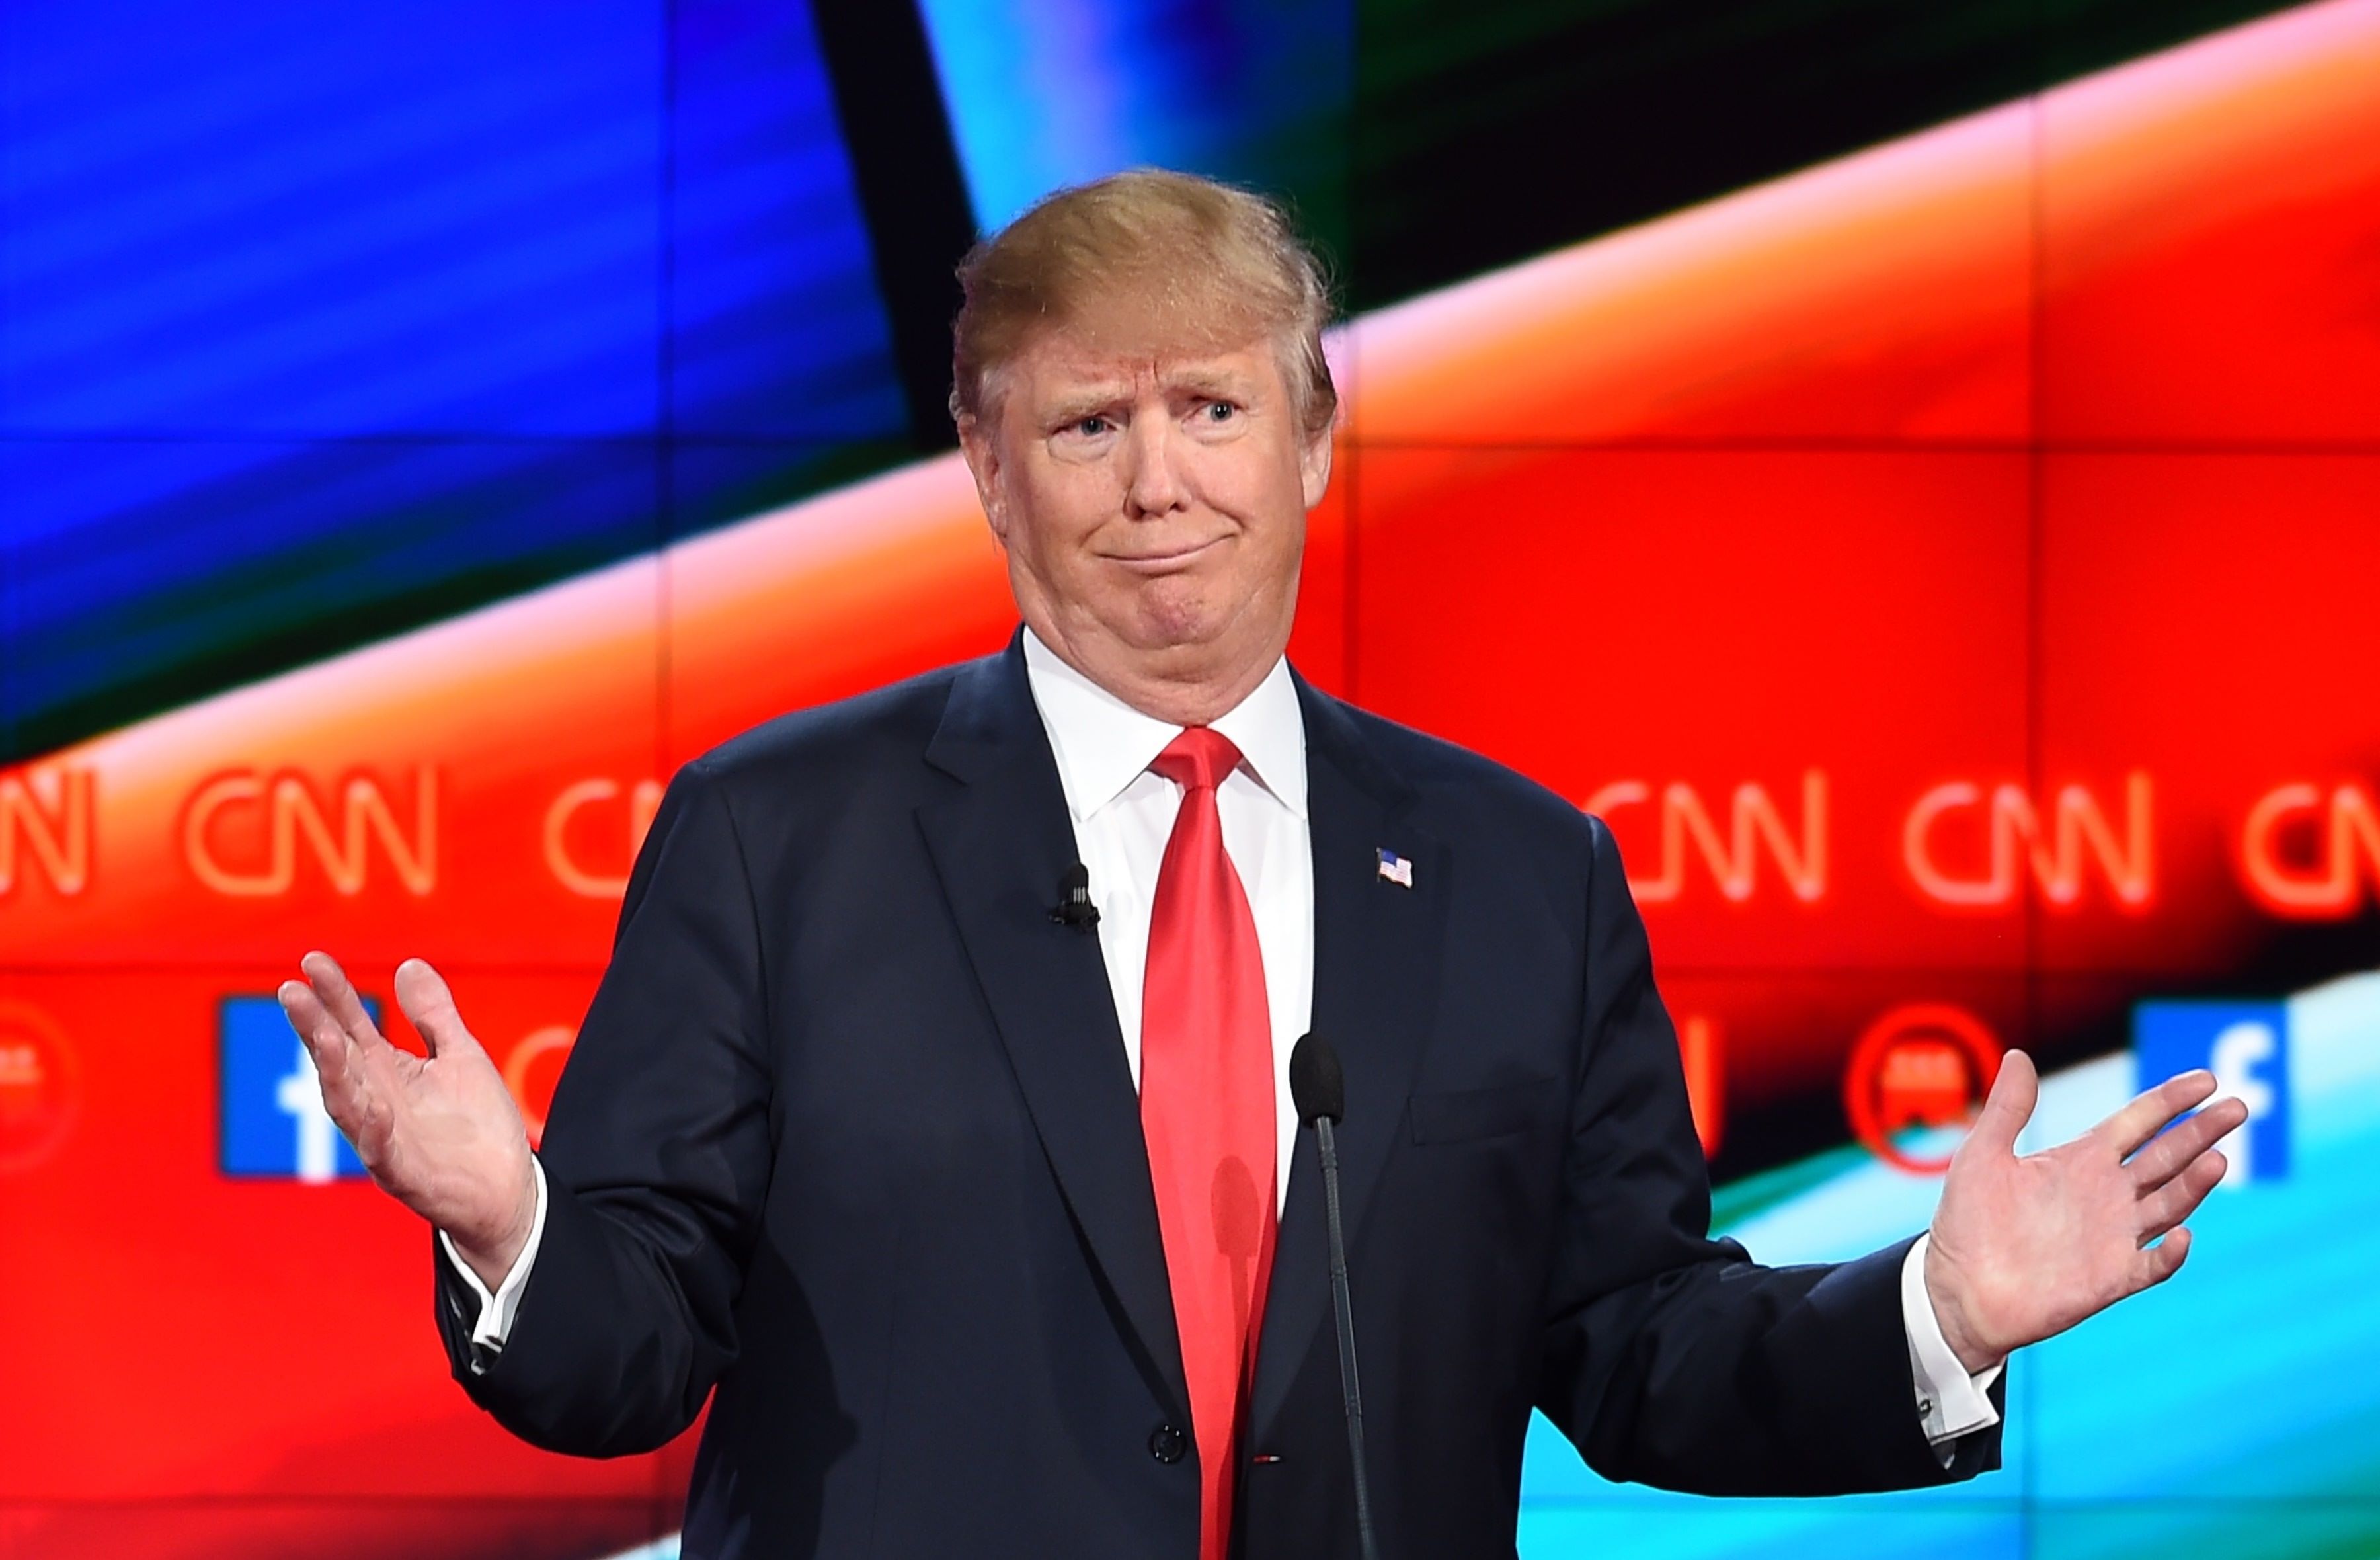 (FILES) - A file picture taken on December 15, 2015 in Las Vegas, Nevada, shows Republican presidential candidate Donald Trump during a presidential debate. Good. Bad. Stupid. When it comes to his choice of words, Donald Trump keeps it simple. So simple, in fact, that even a nine-year-old can get what the Republican White House frontrunner is saying, according to a test developed for the US Navy. AFP PHOTO/ ROBYN BECK